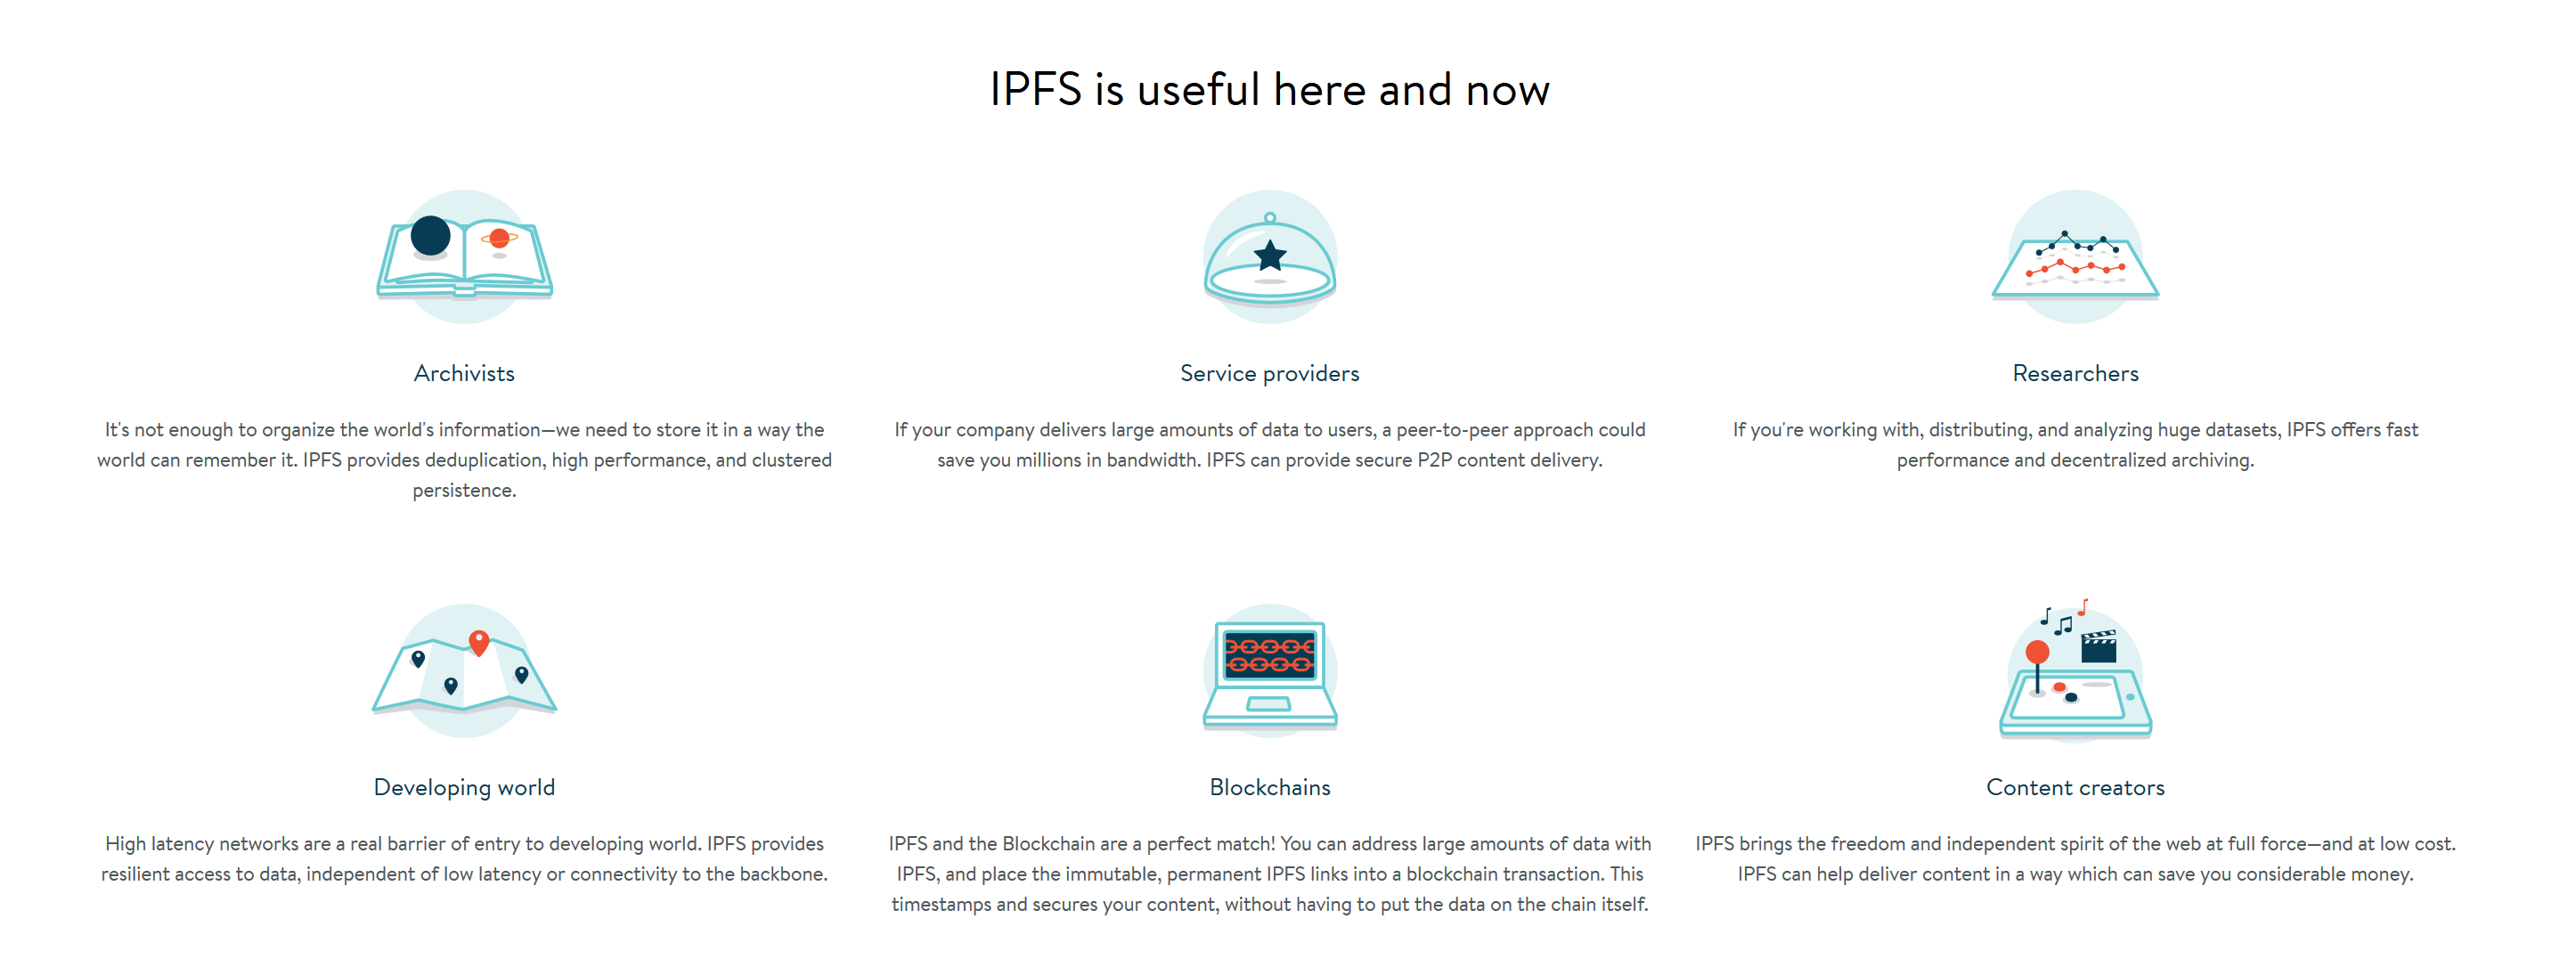 ipfs2.png